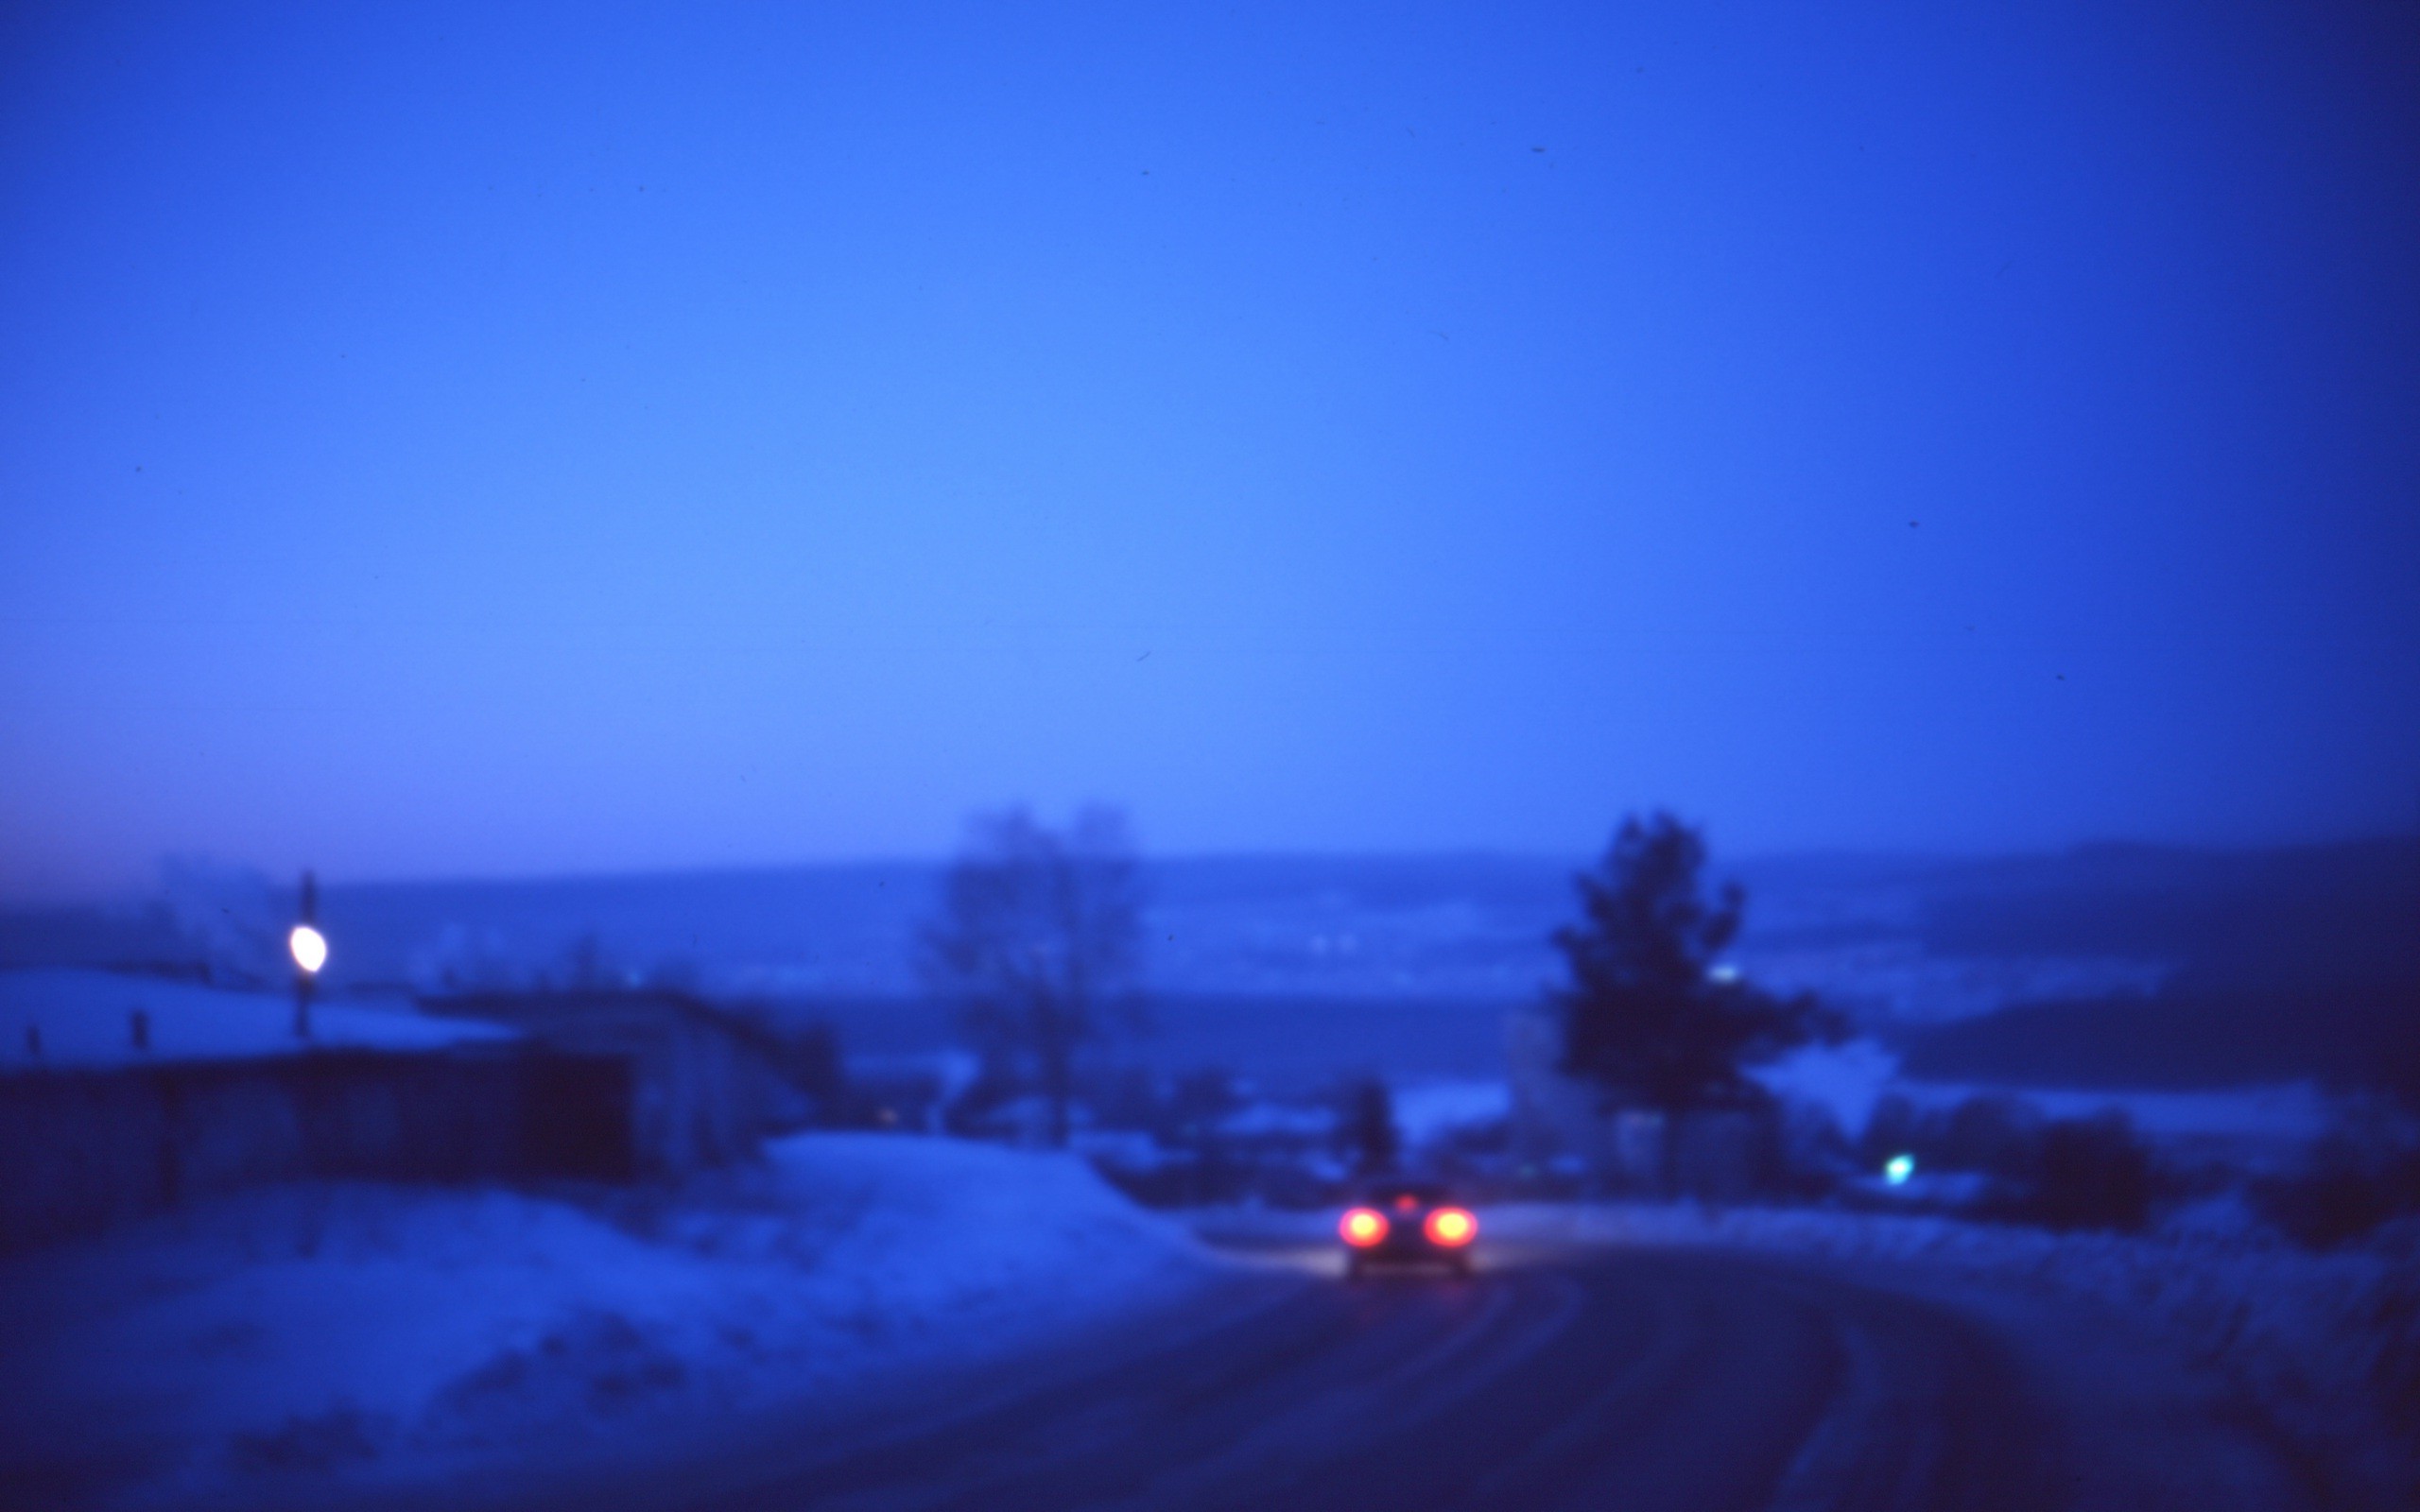 photography, Landscape, Nature, Blue, Winter, Road, Trees, Blurred, Frost Wallpaper